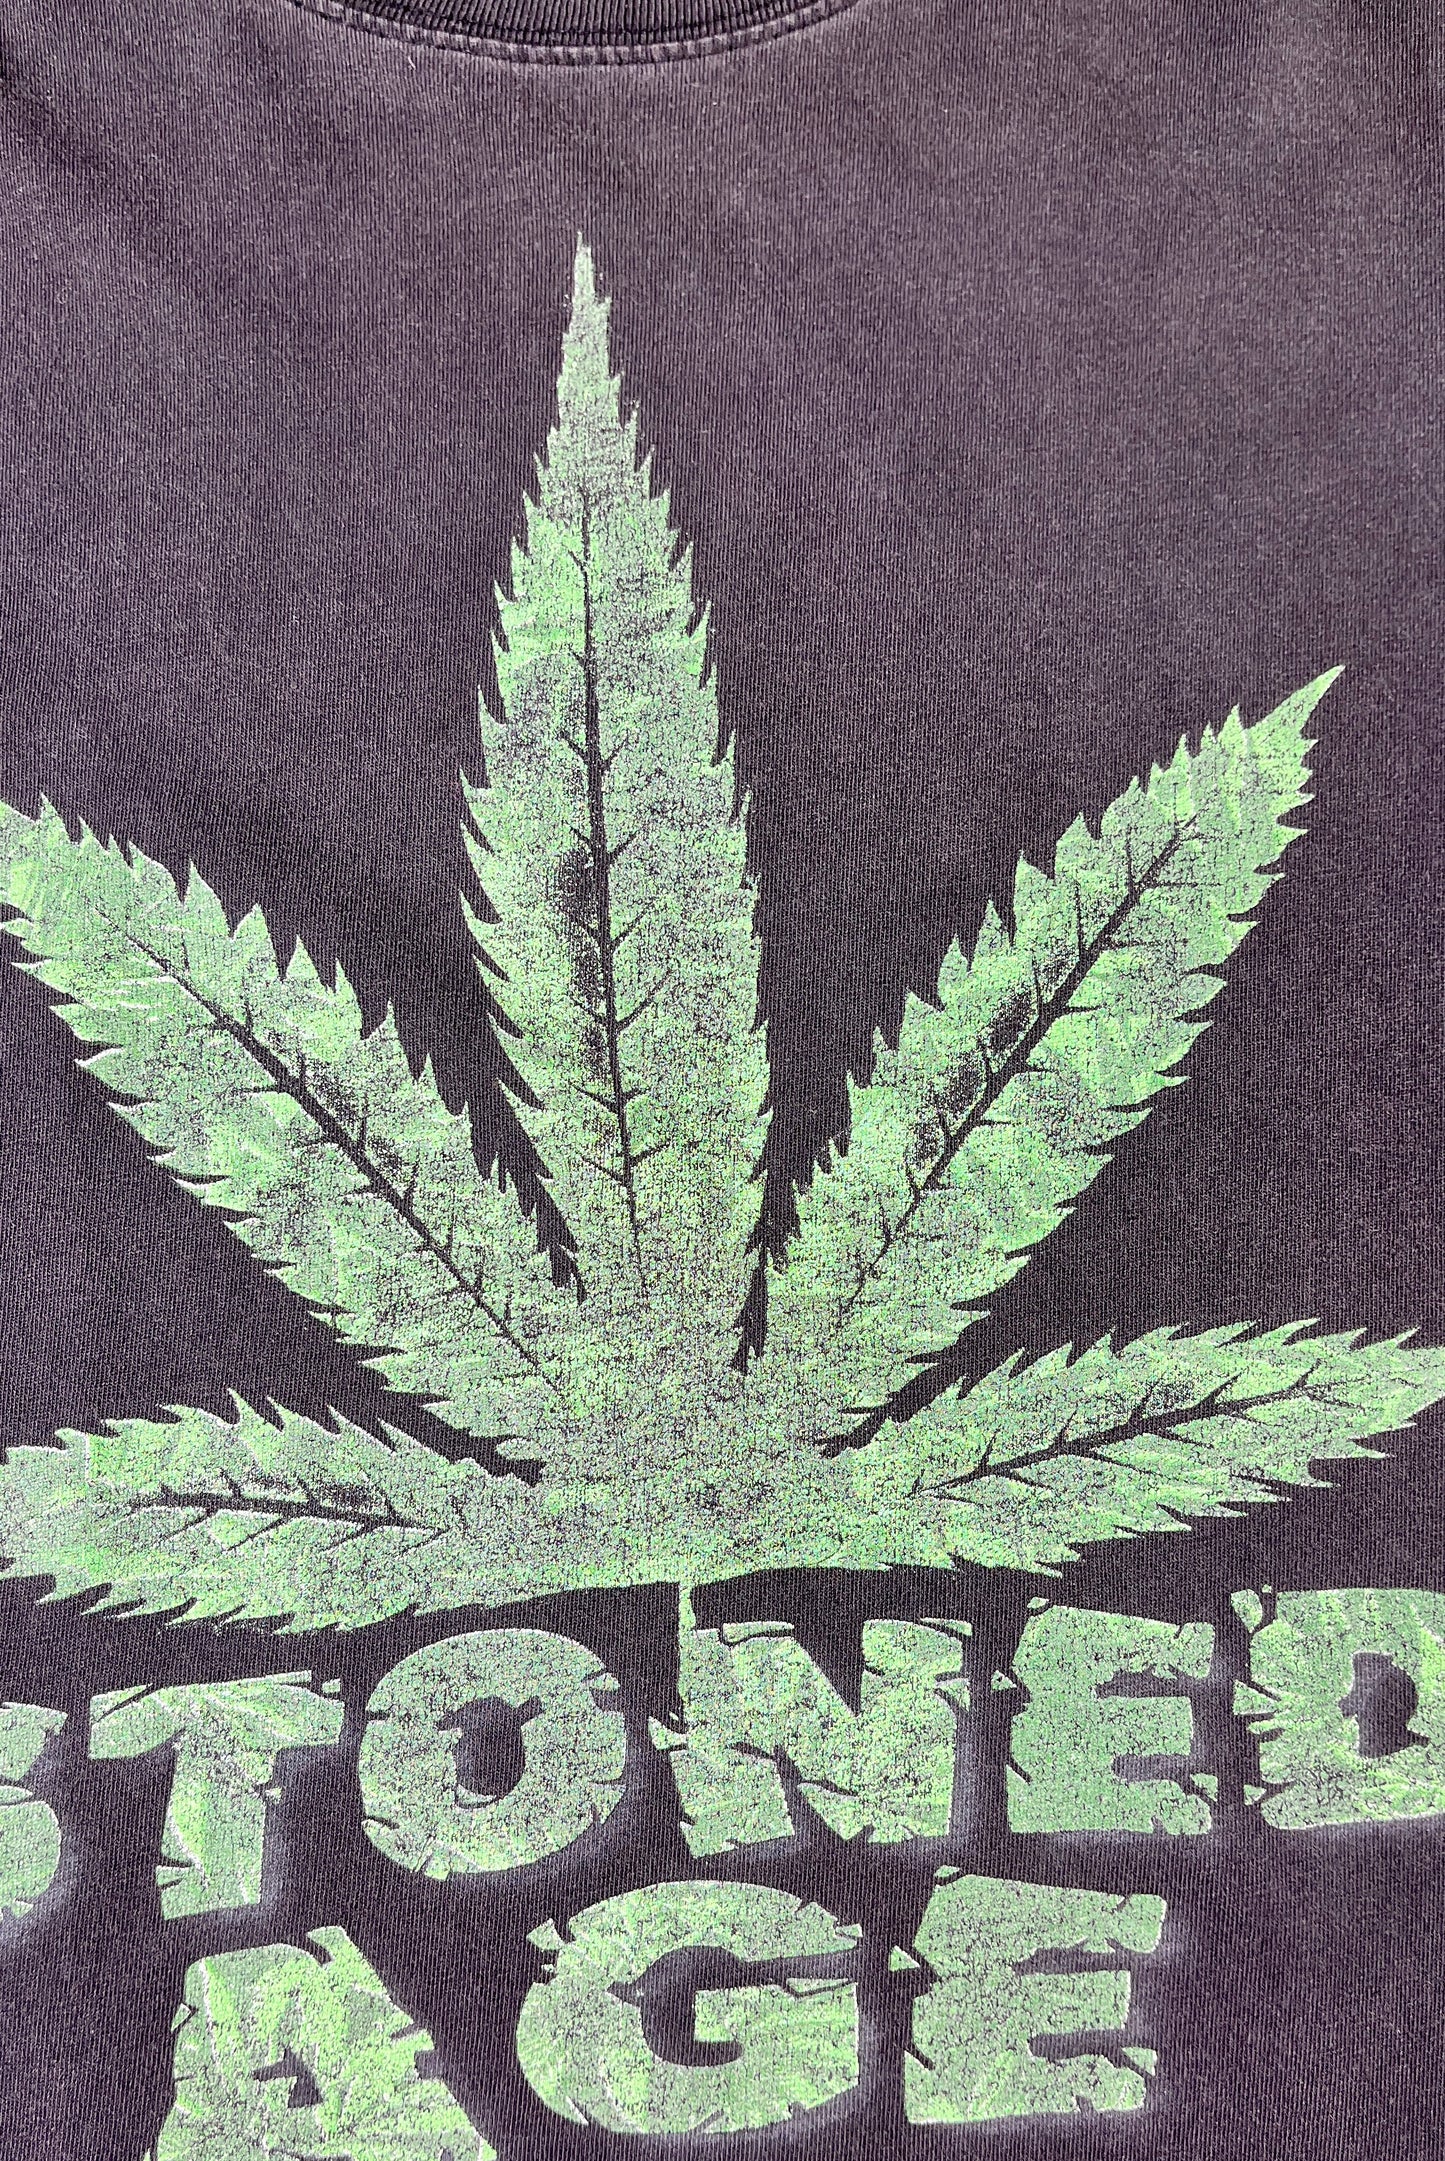 Vintage Stoned Age T-Shirt Weed Tee